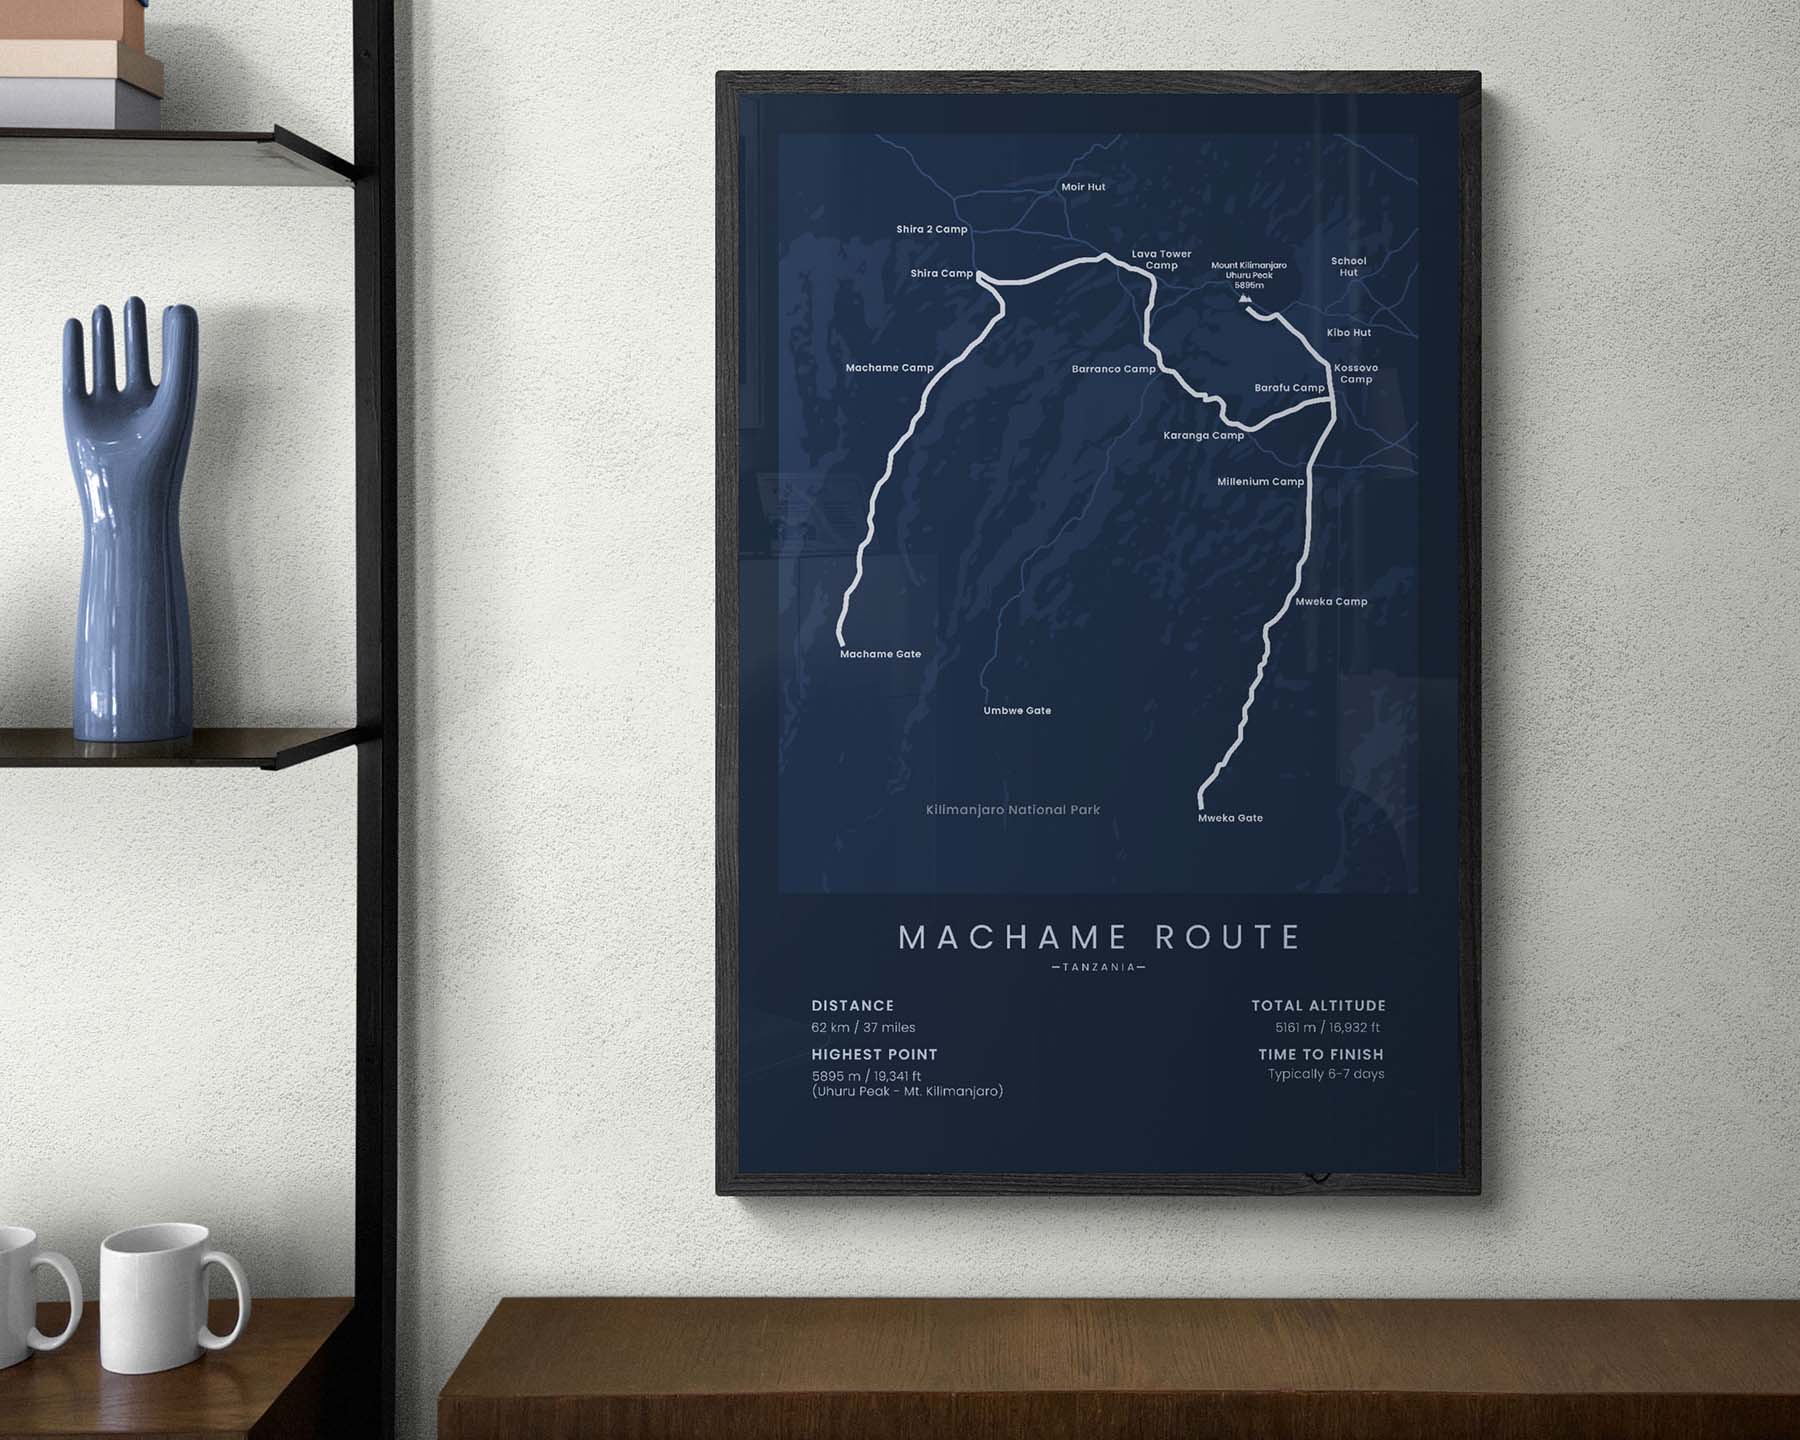 Whiskey Route (Africa) route wall art in minimal room decor